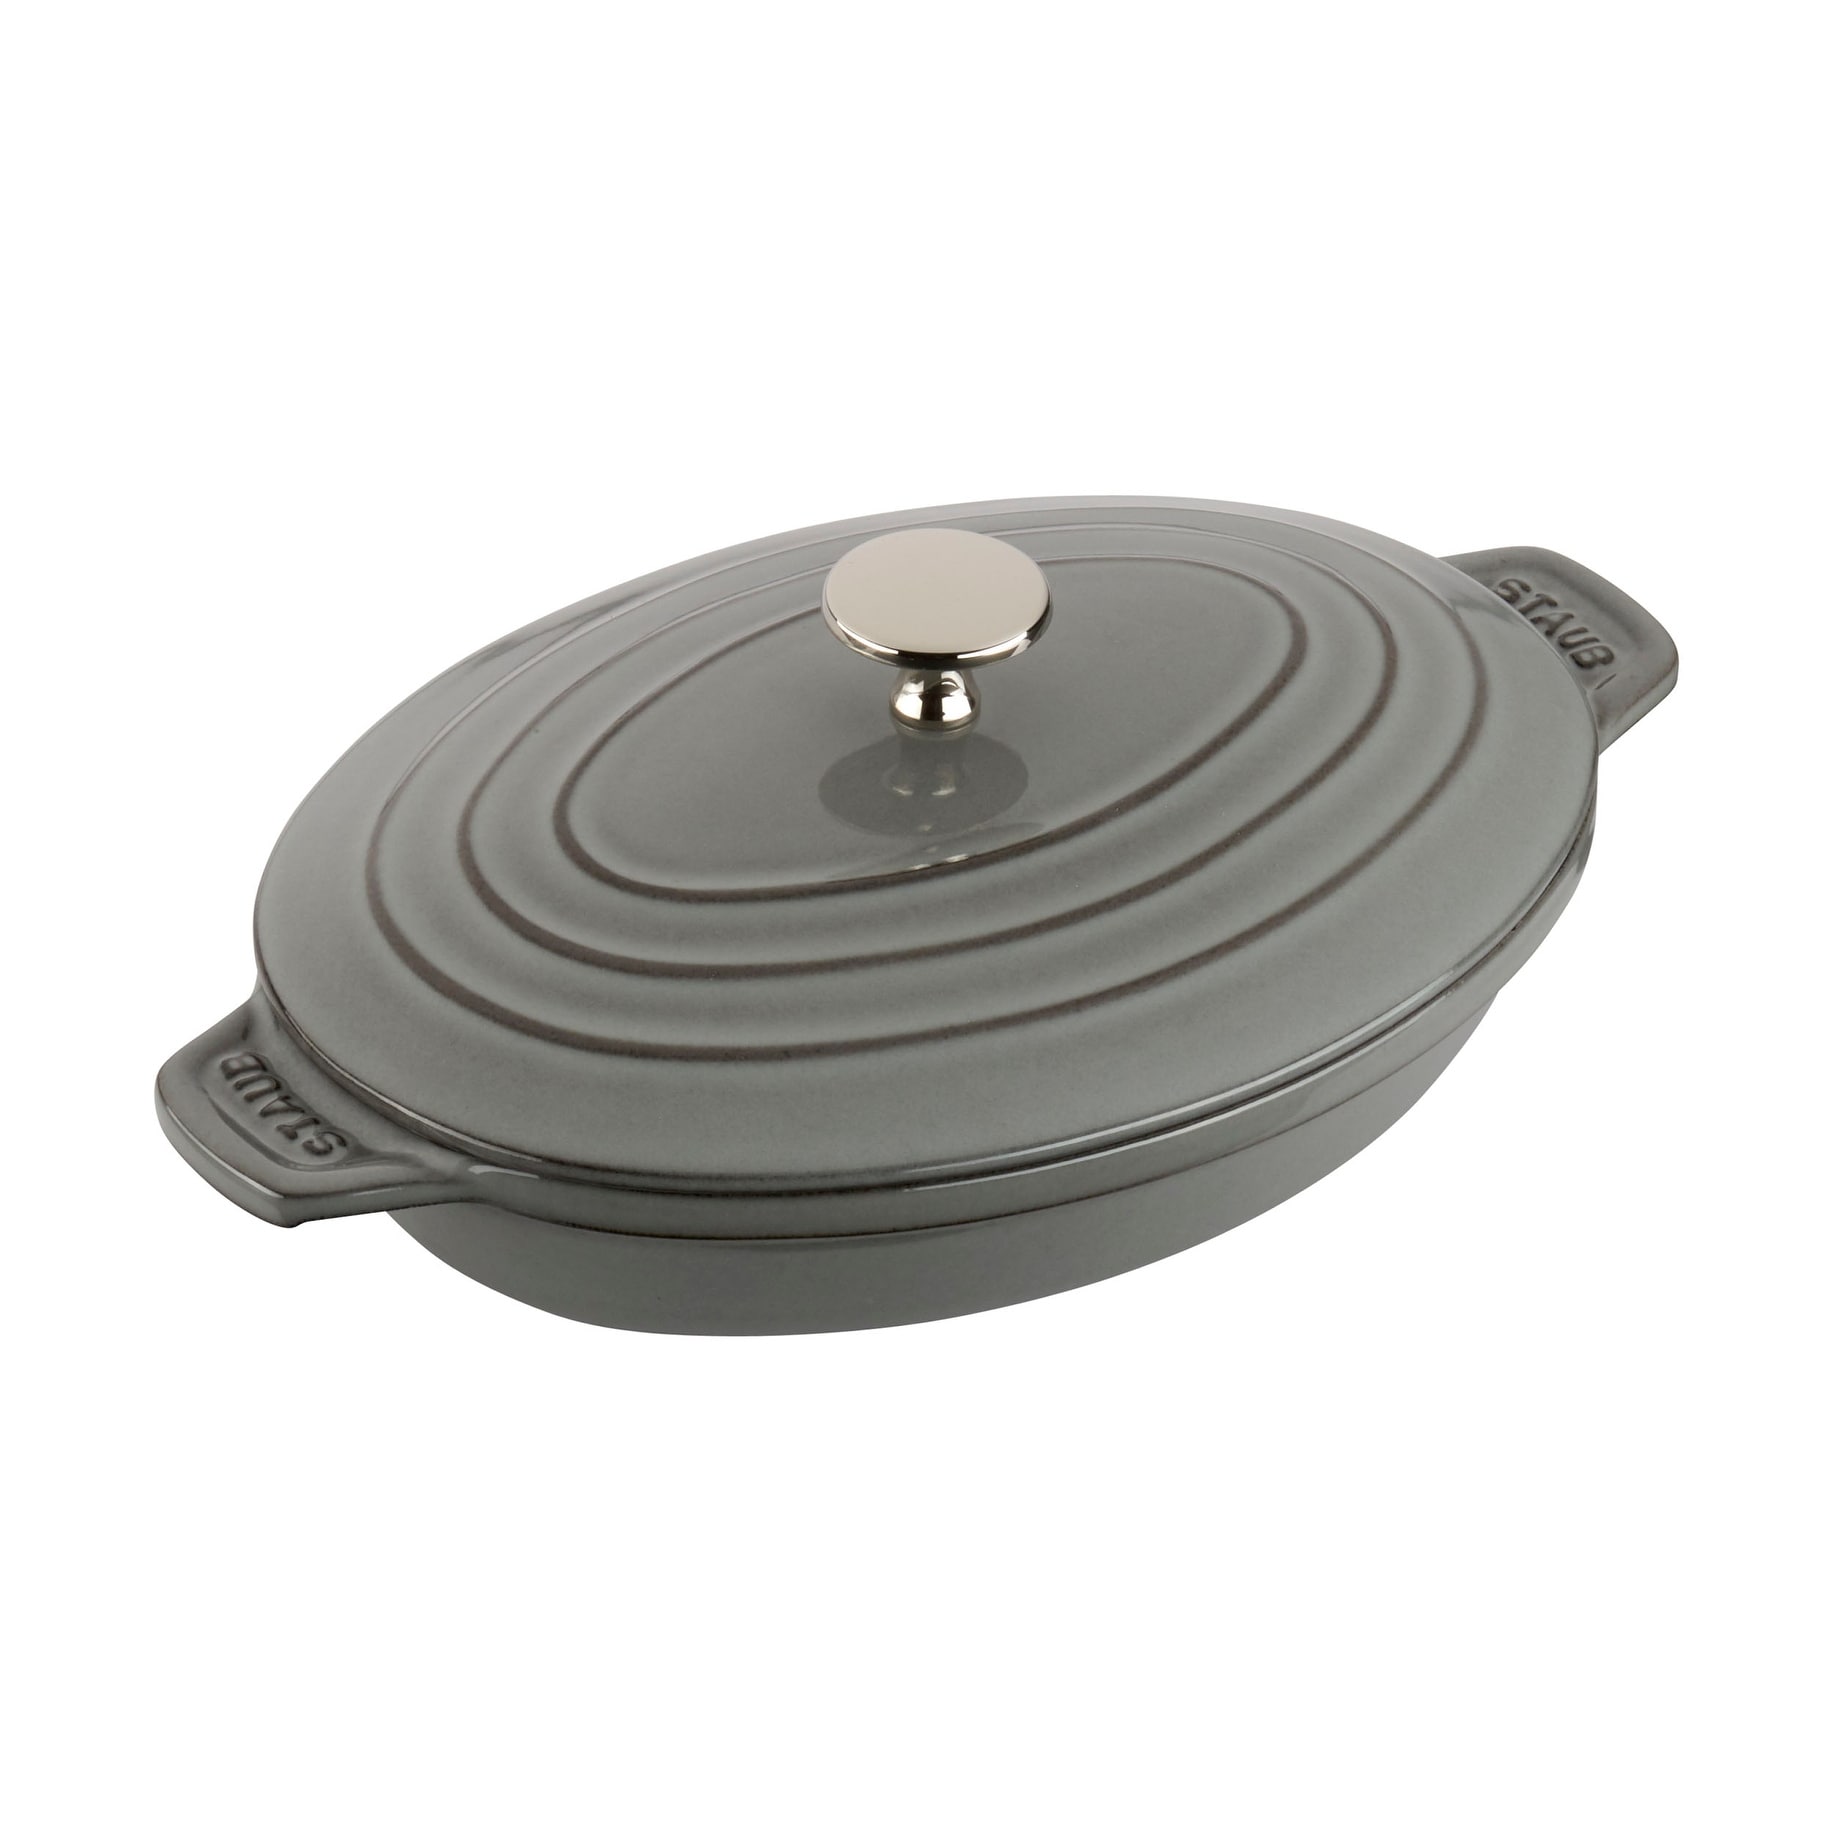 https://ak1.ostkcdn.com/images/products/is/images/direct/b666f3e4609d5a34c5a3f8161e199fde96a7d66b/STAUB-Cast-Iron-9-inch-x-6.6-inch-Oval-Covered-Baking-Dish.jpg